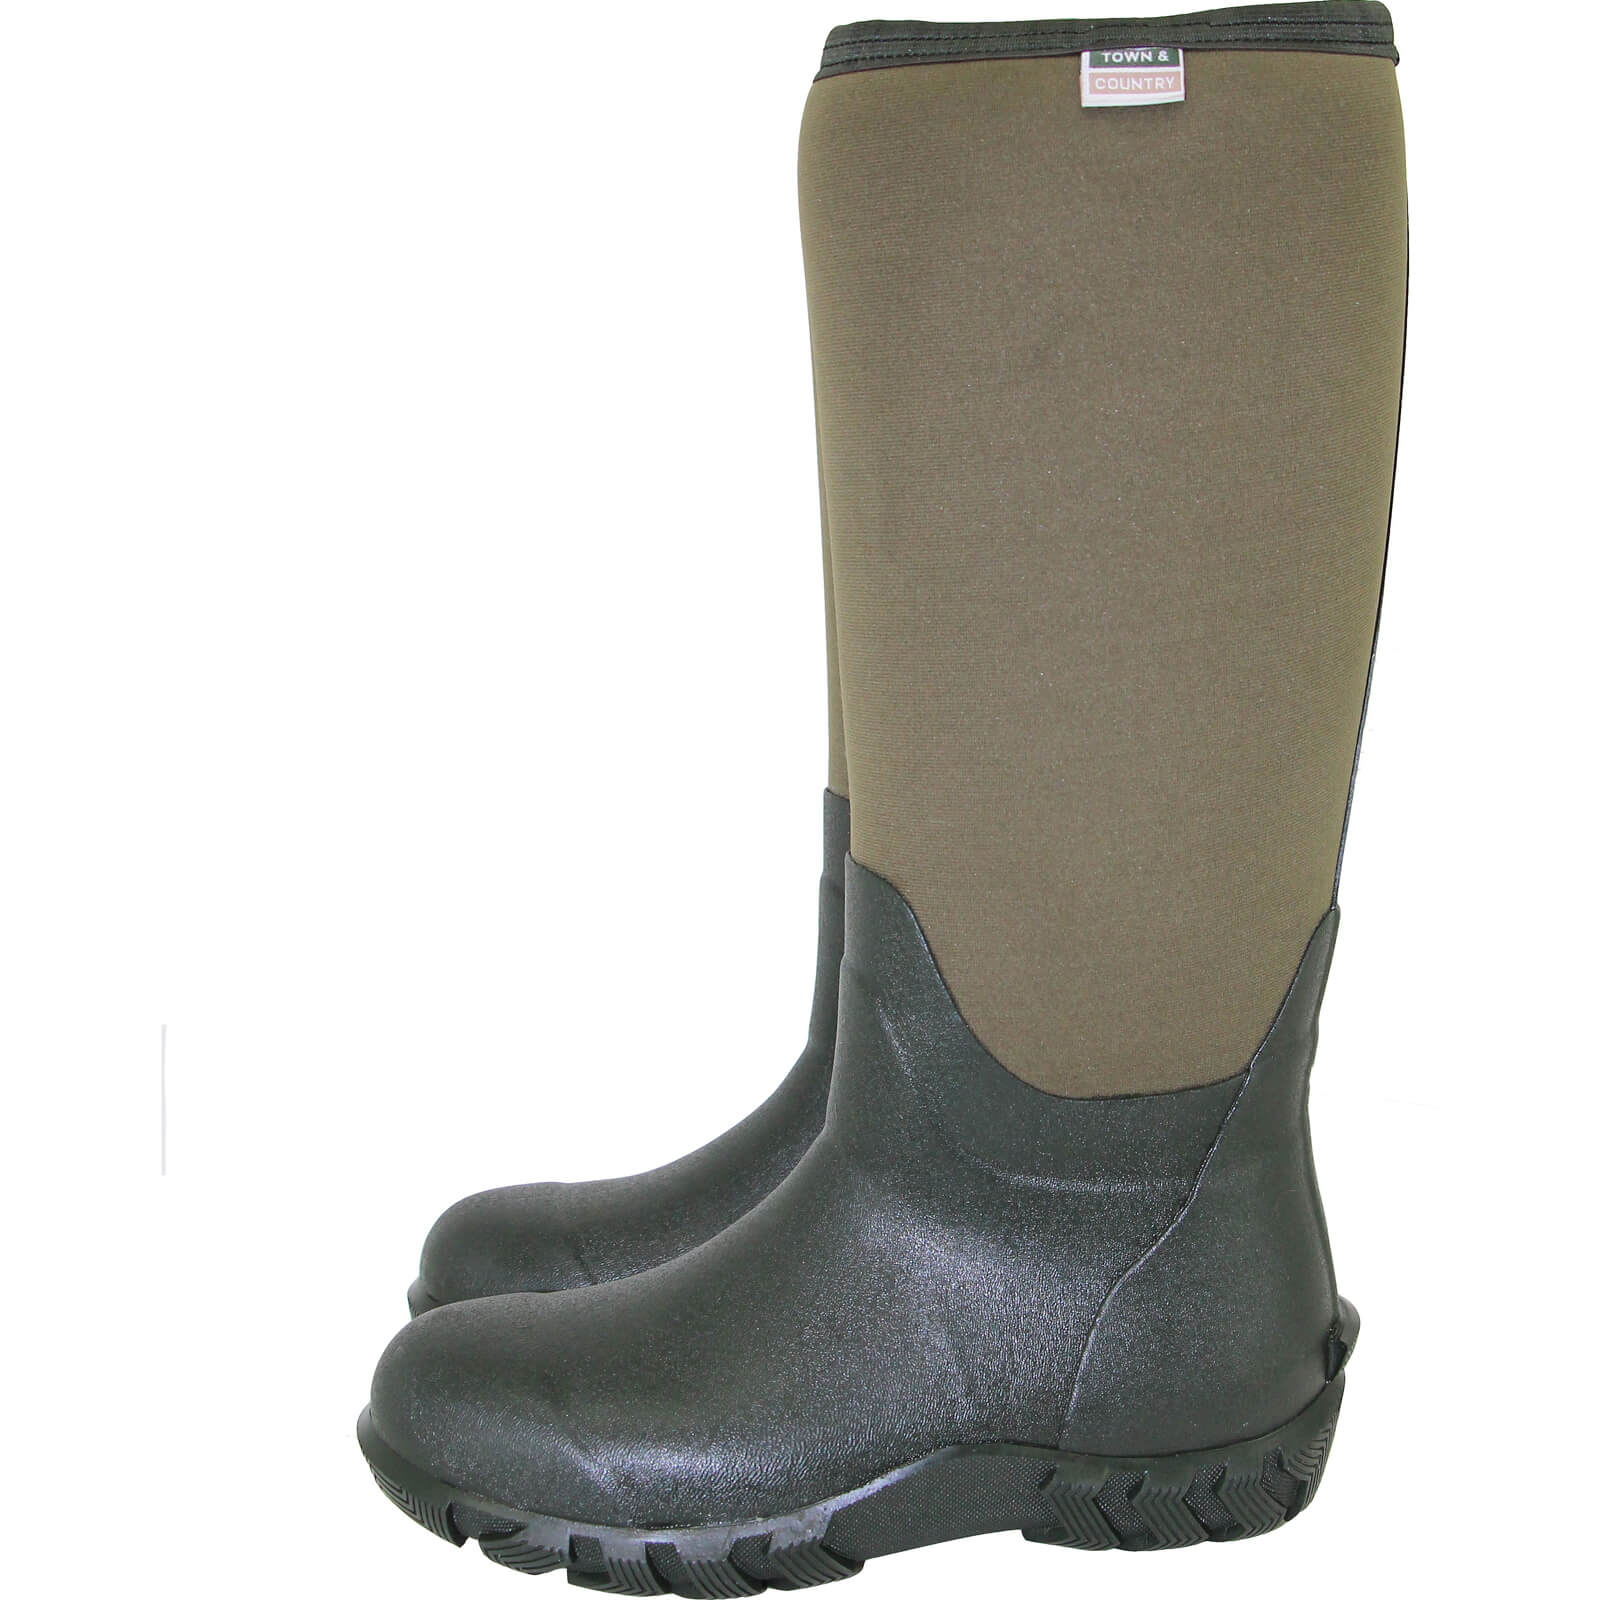 Image of Town and Country Buckingham Rubber Wellington Boots Green Size 10